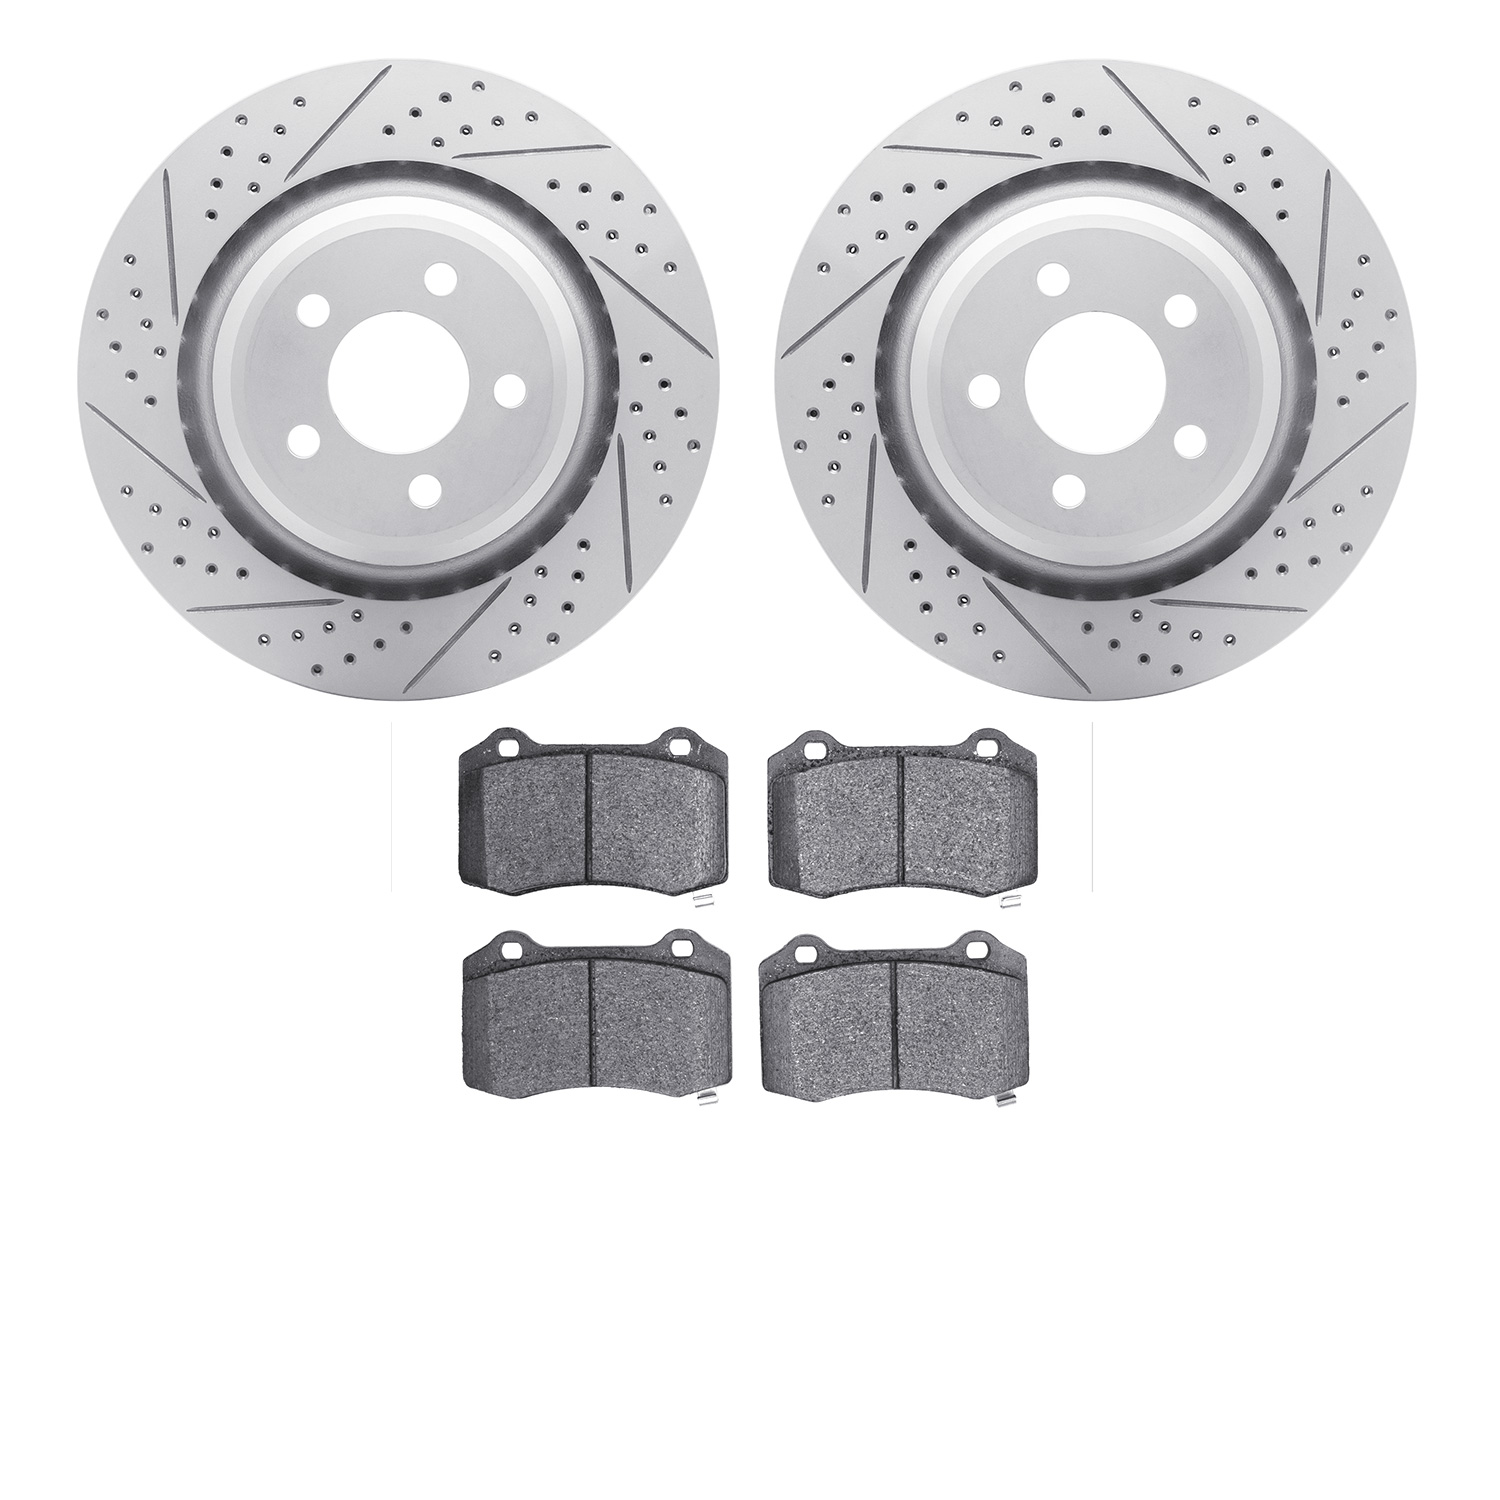 2502-39018 Geoperformance Drilled/Slotted Rotors w/5000 Advanced Brake Pads Kit, Fits Select Mopar, Position: Rear